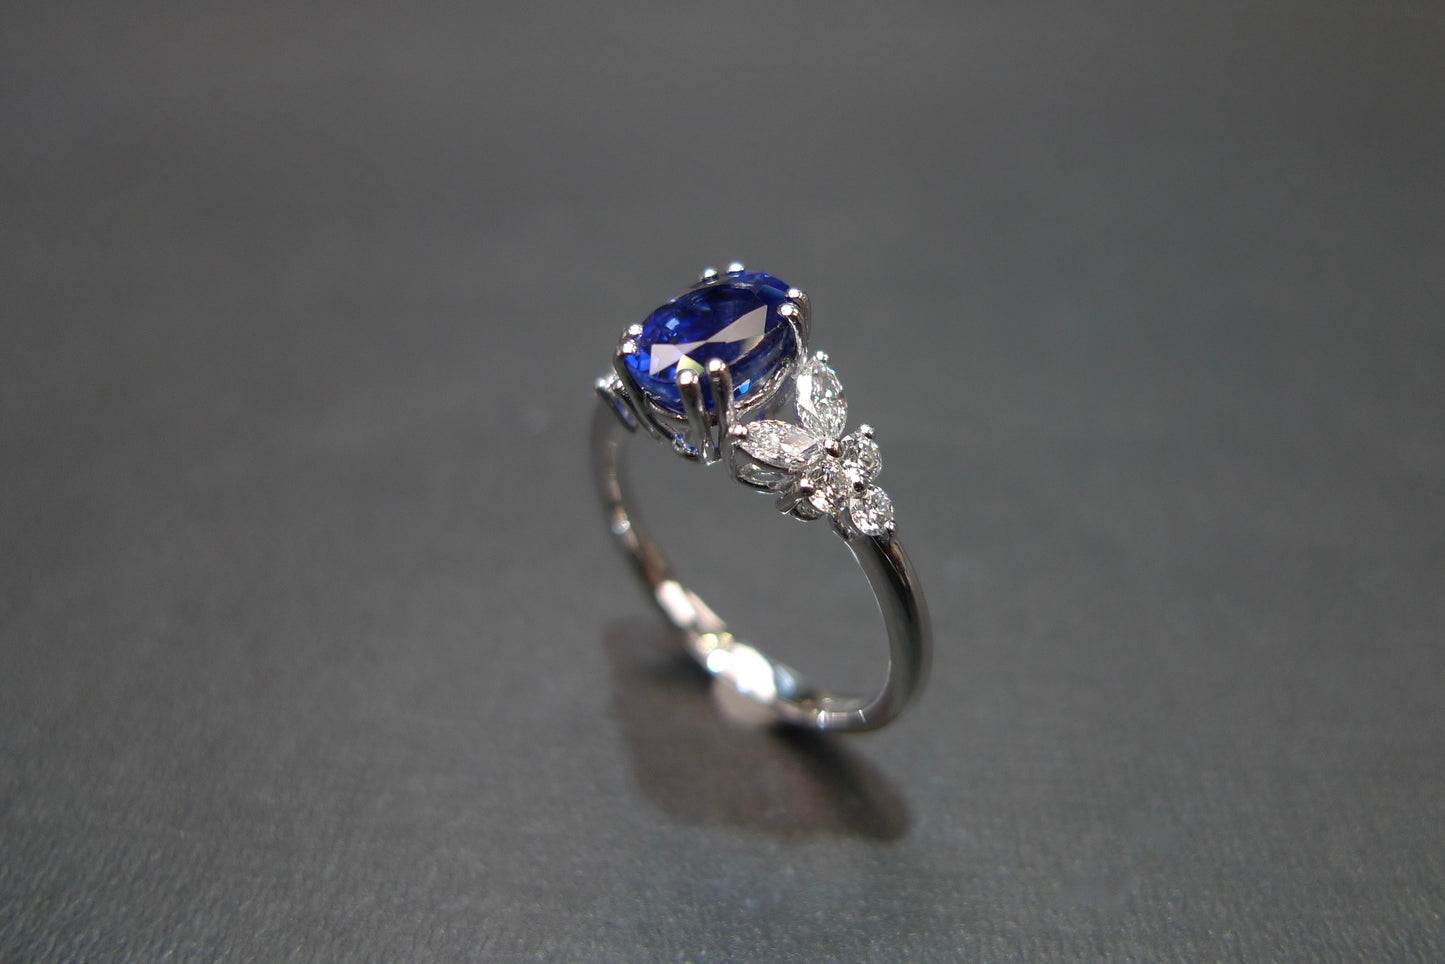 Blue Sapphire and Marquise Diamond Ring - HN JEWELRY